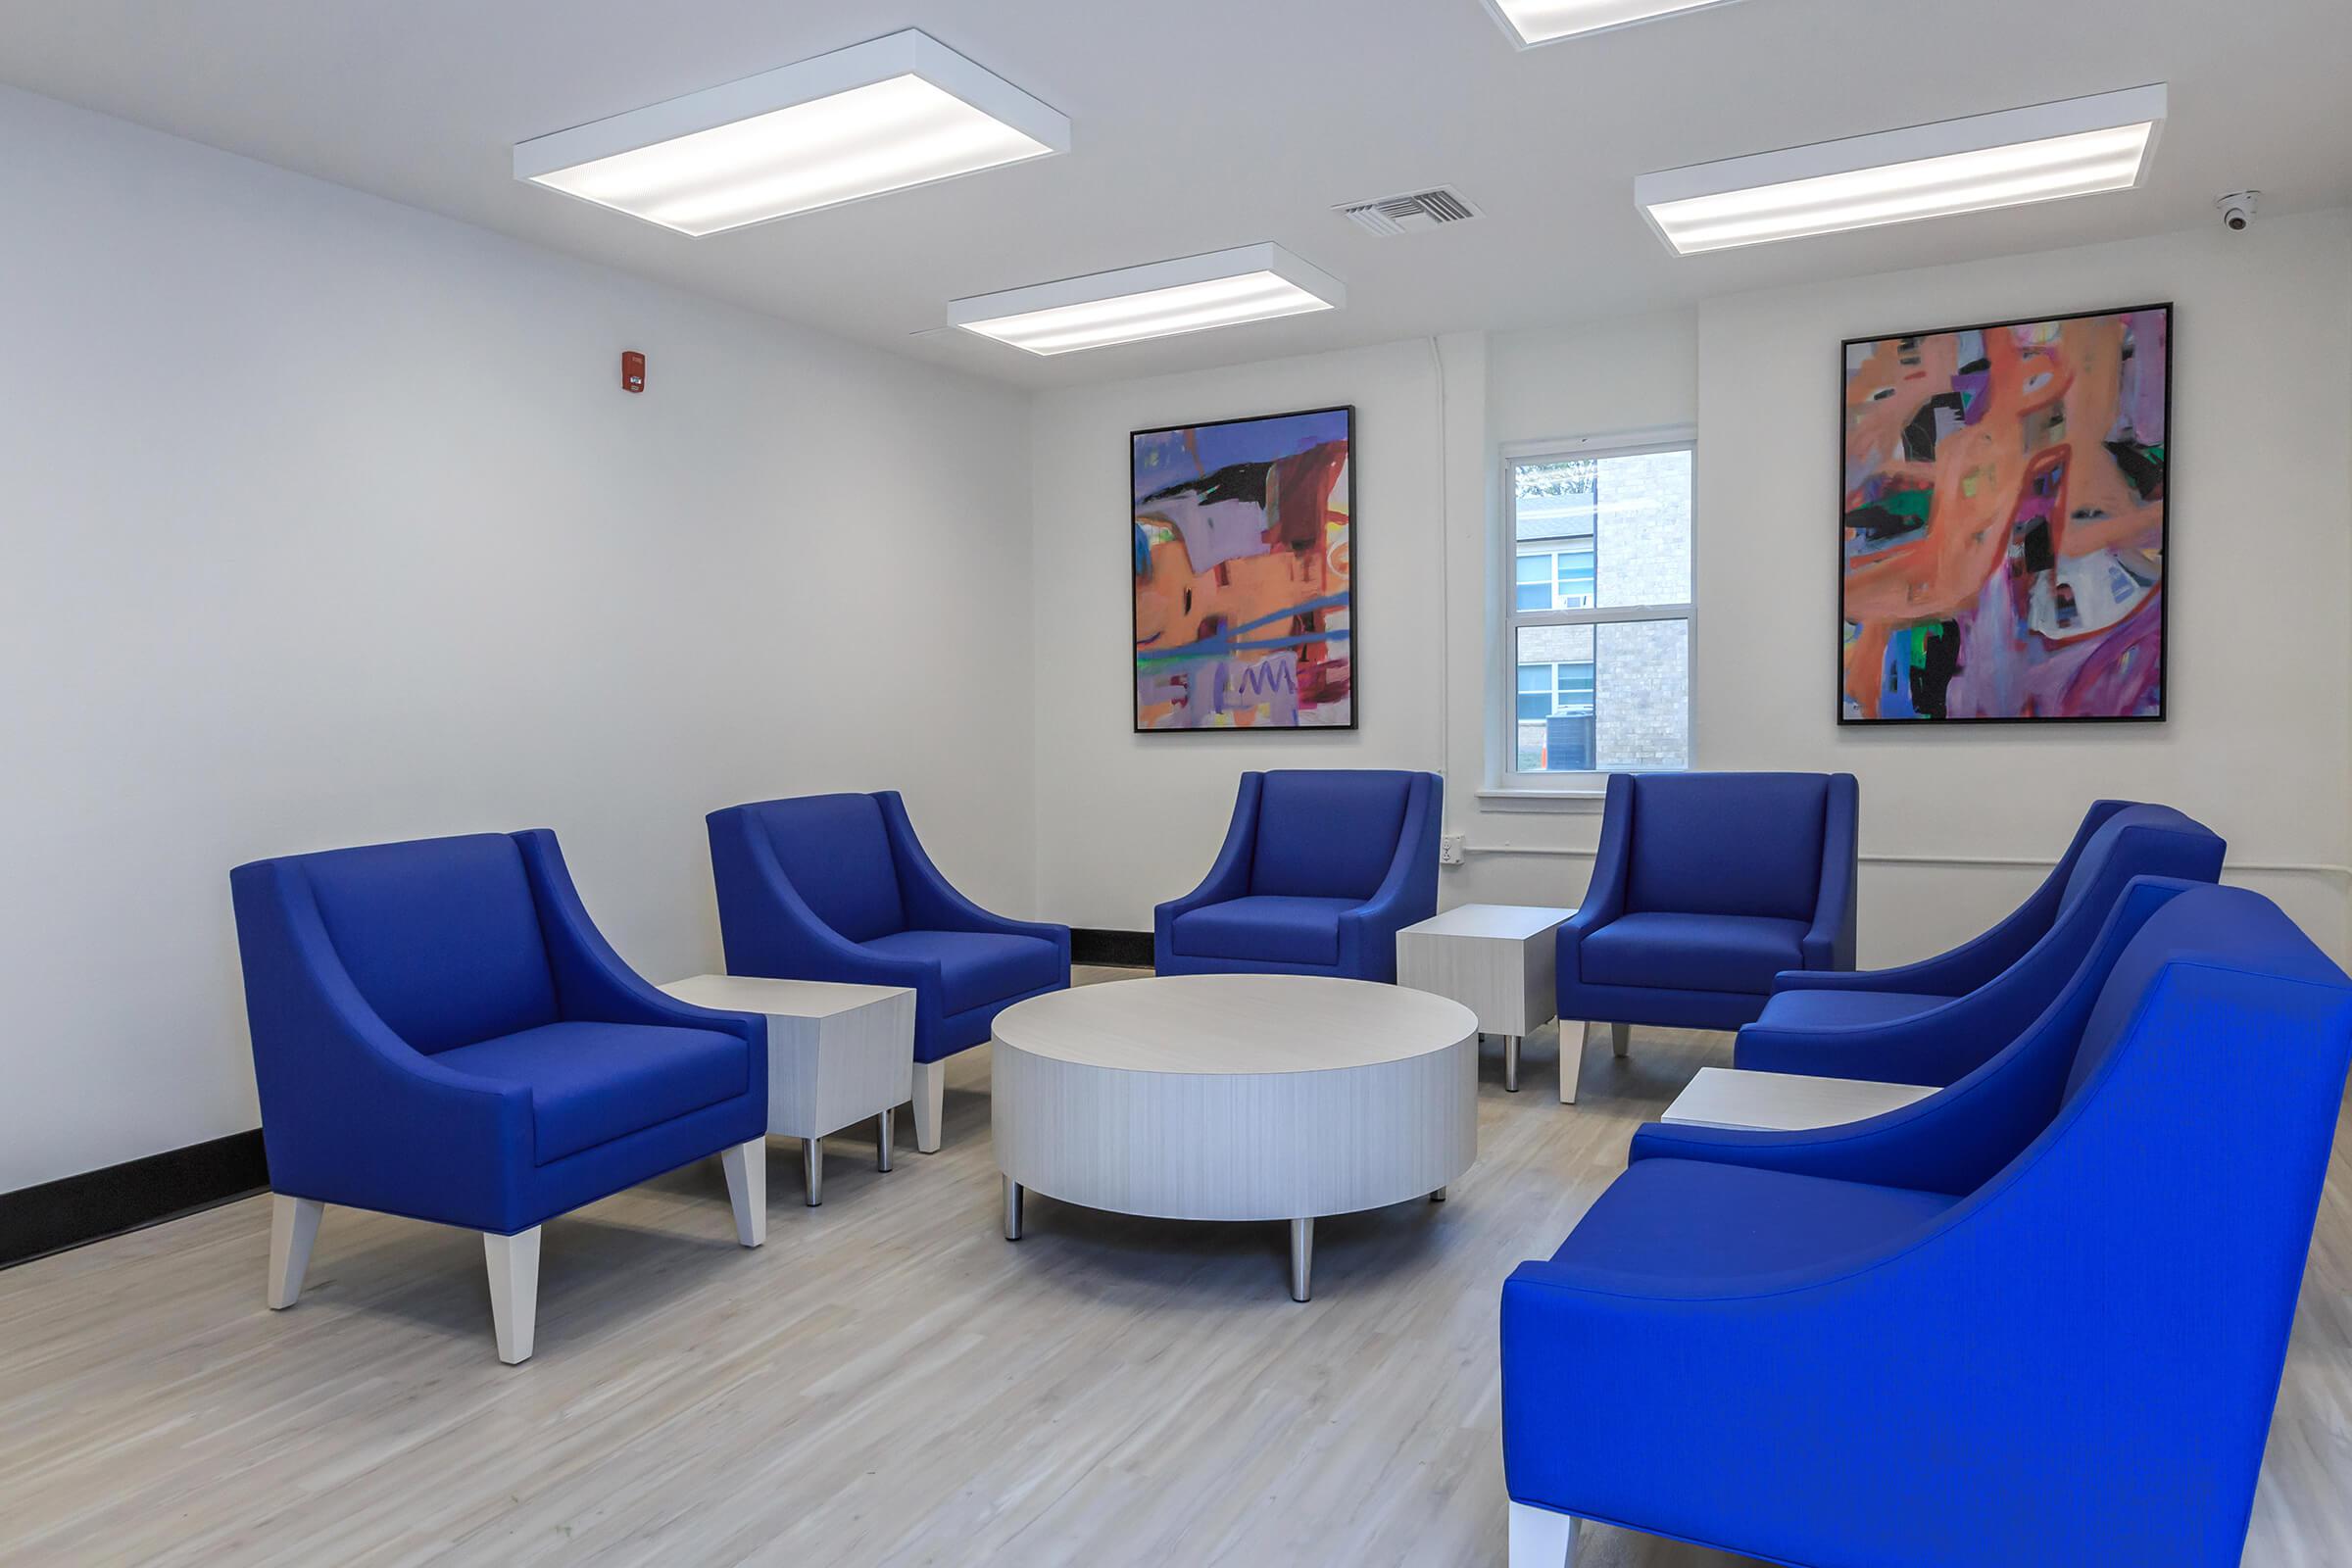 Community room with blue chairs